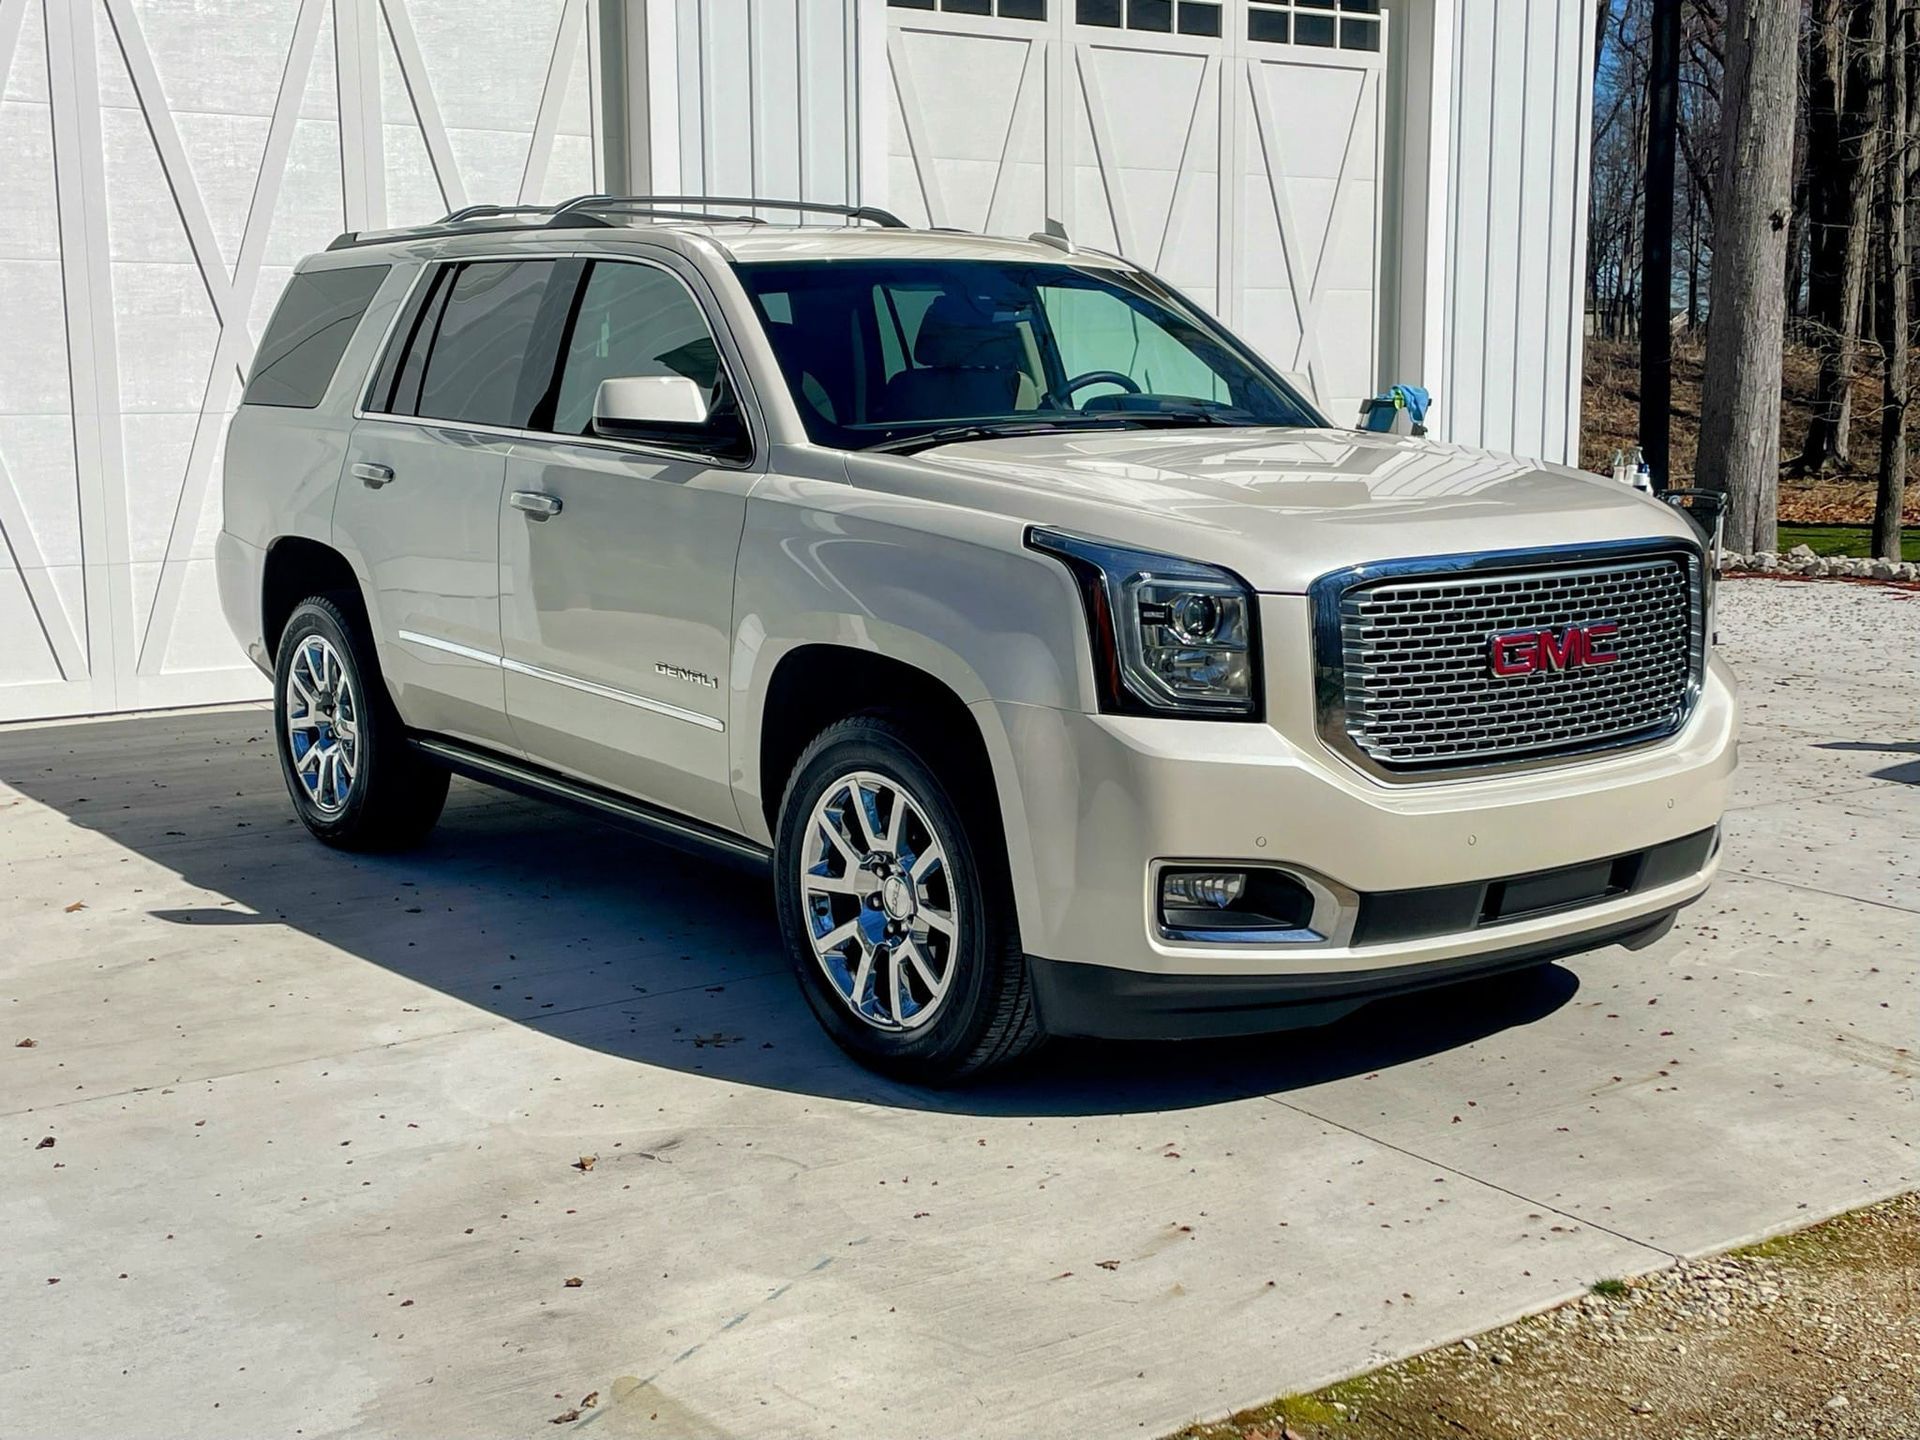 A silver gmc yukon is parked in front of a white garage.